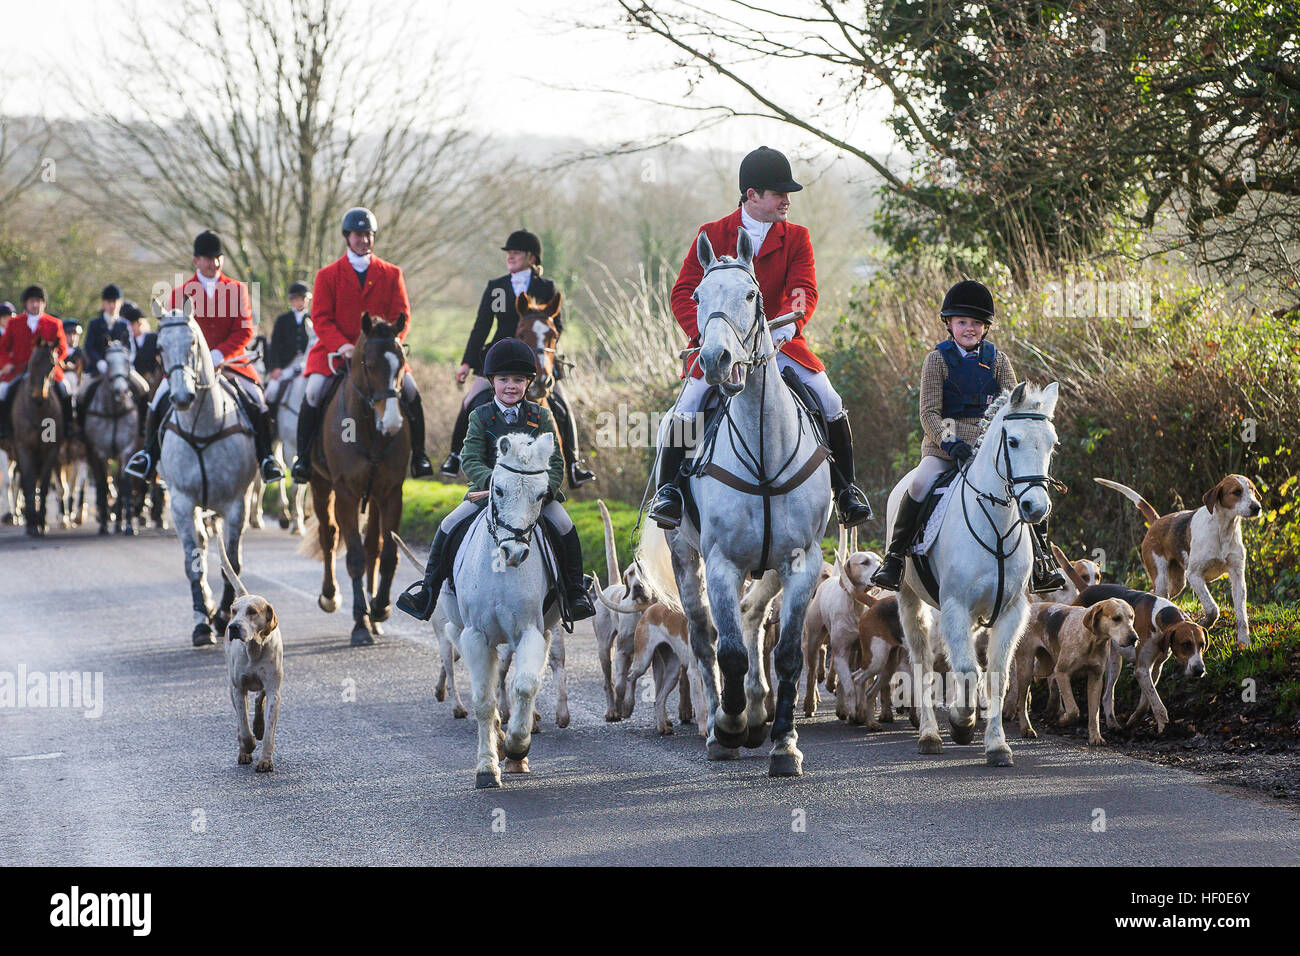 Lacock Wiltshire UK 26th December 2016. The Avon Vale Hunt annual Boxing Day meet in th historic Wiltshire Village of Lacock Credit: David Betteridge/Alamy Live News Stock Photo